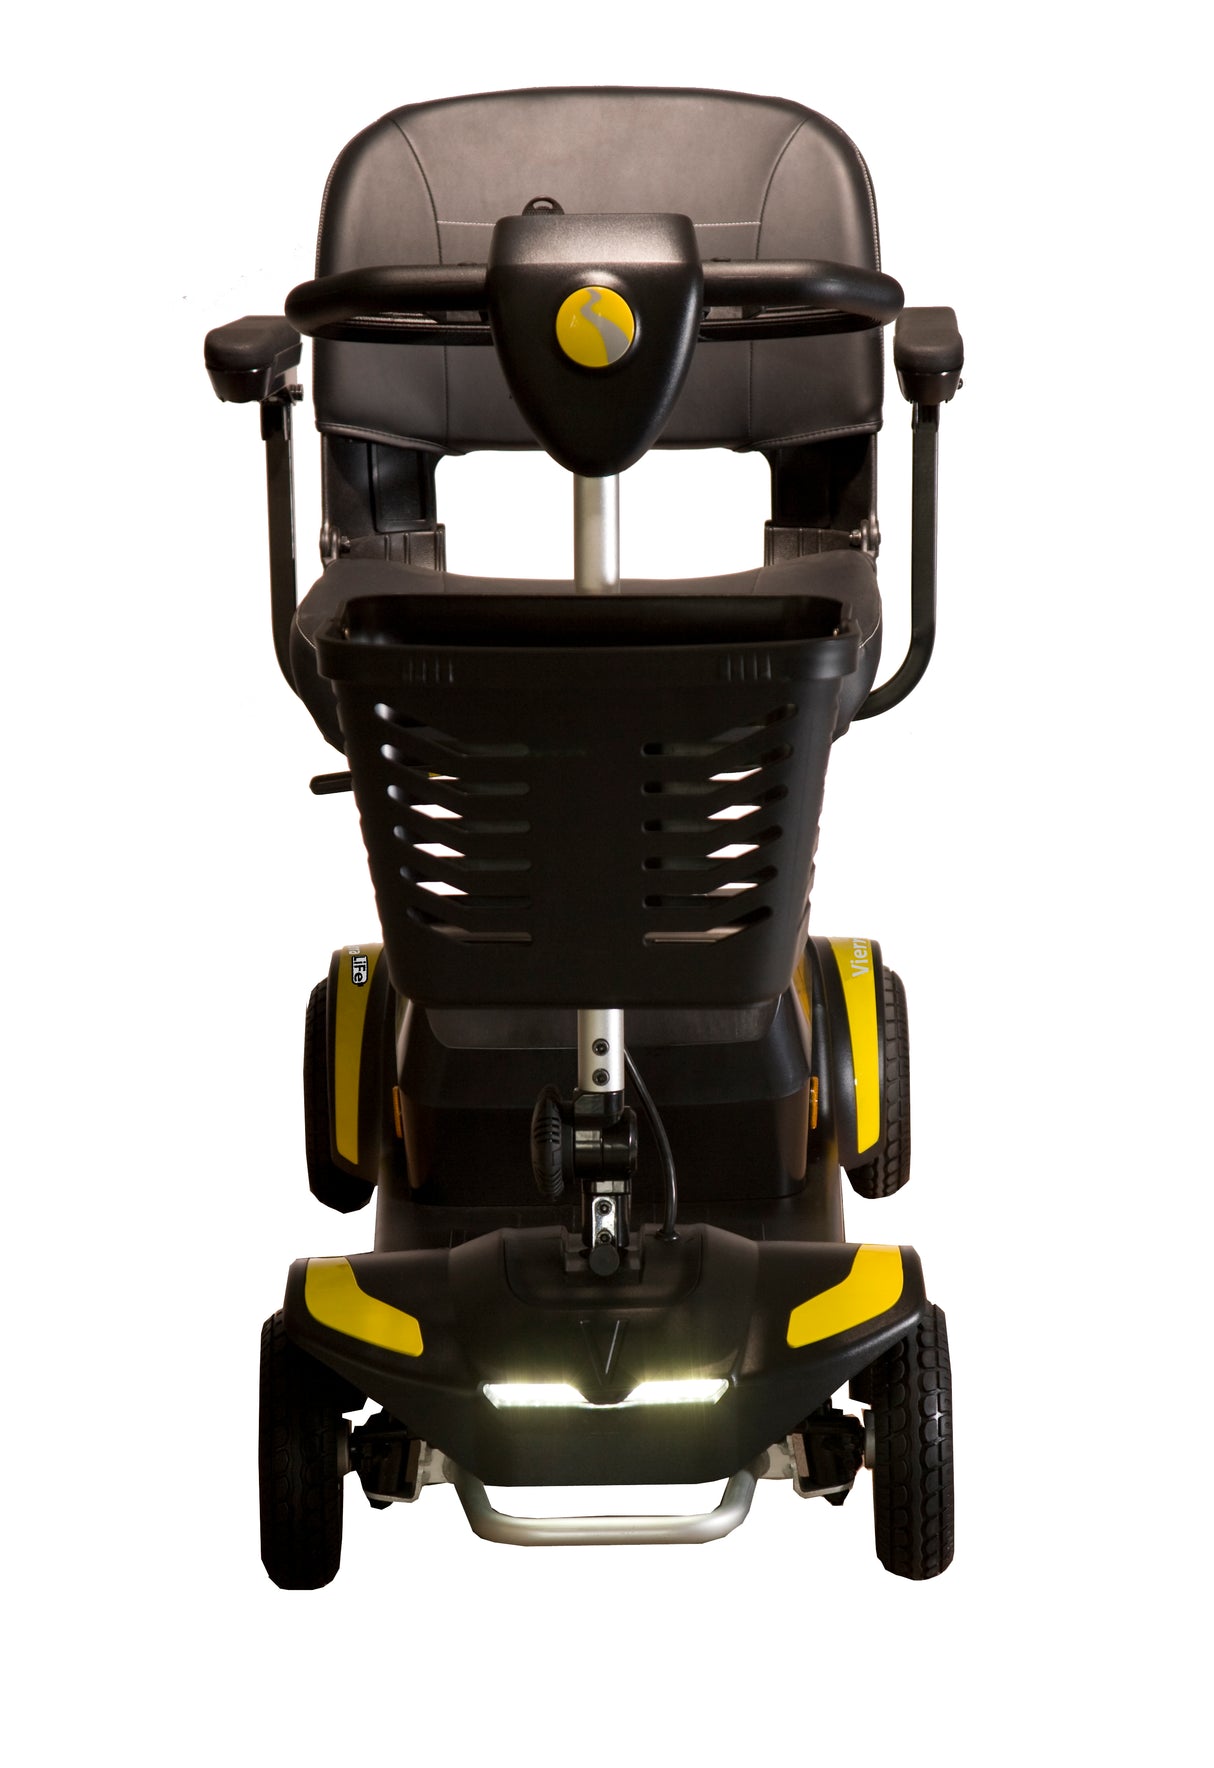 Vierra Life Mobility Scooter